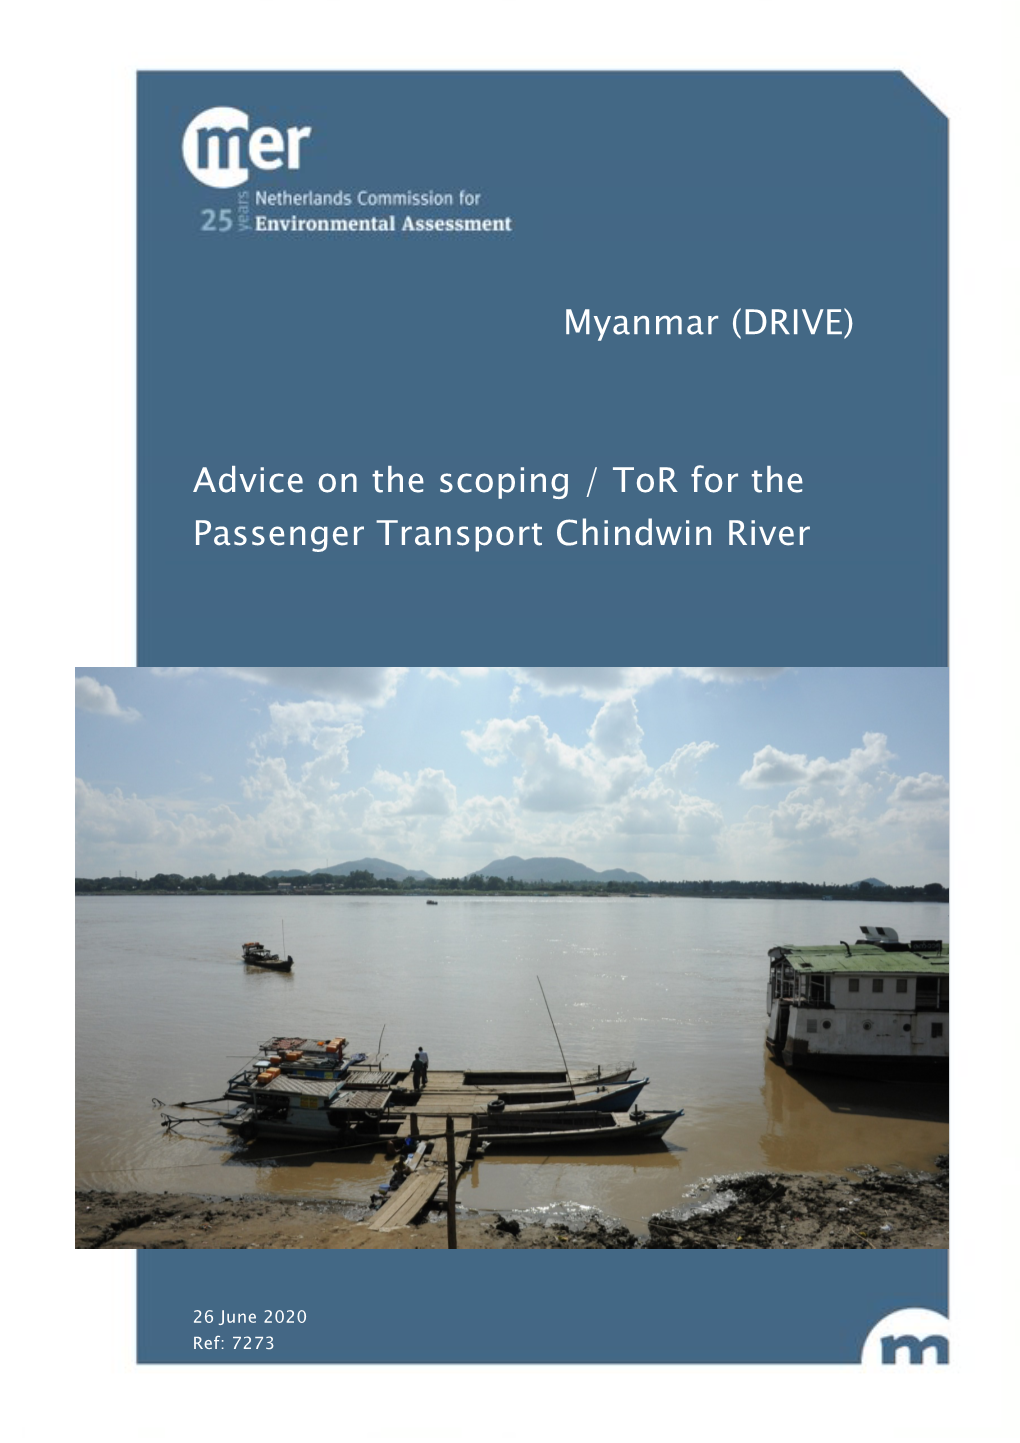 Advice on the Scoping / Tor for the Passenger Transport Chindwin River